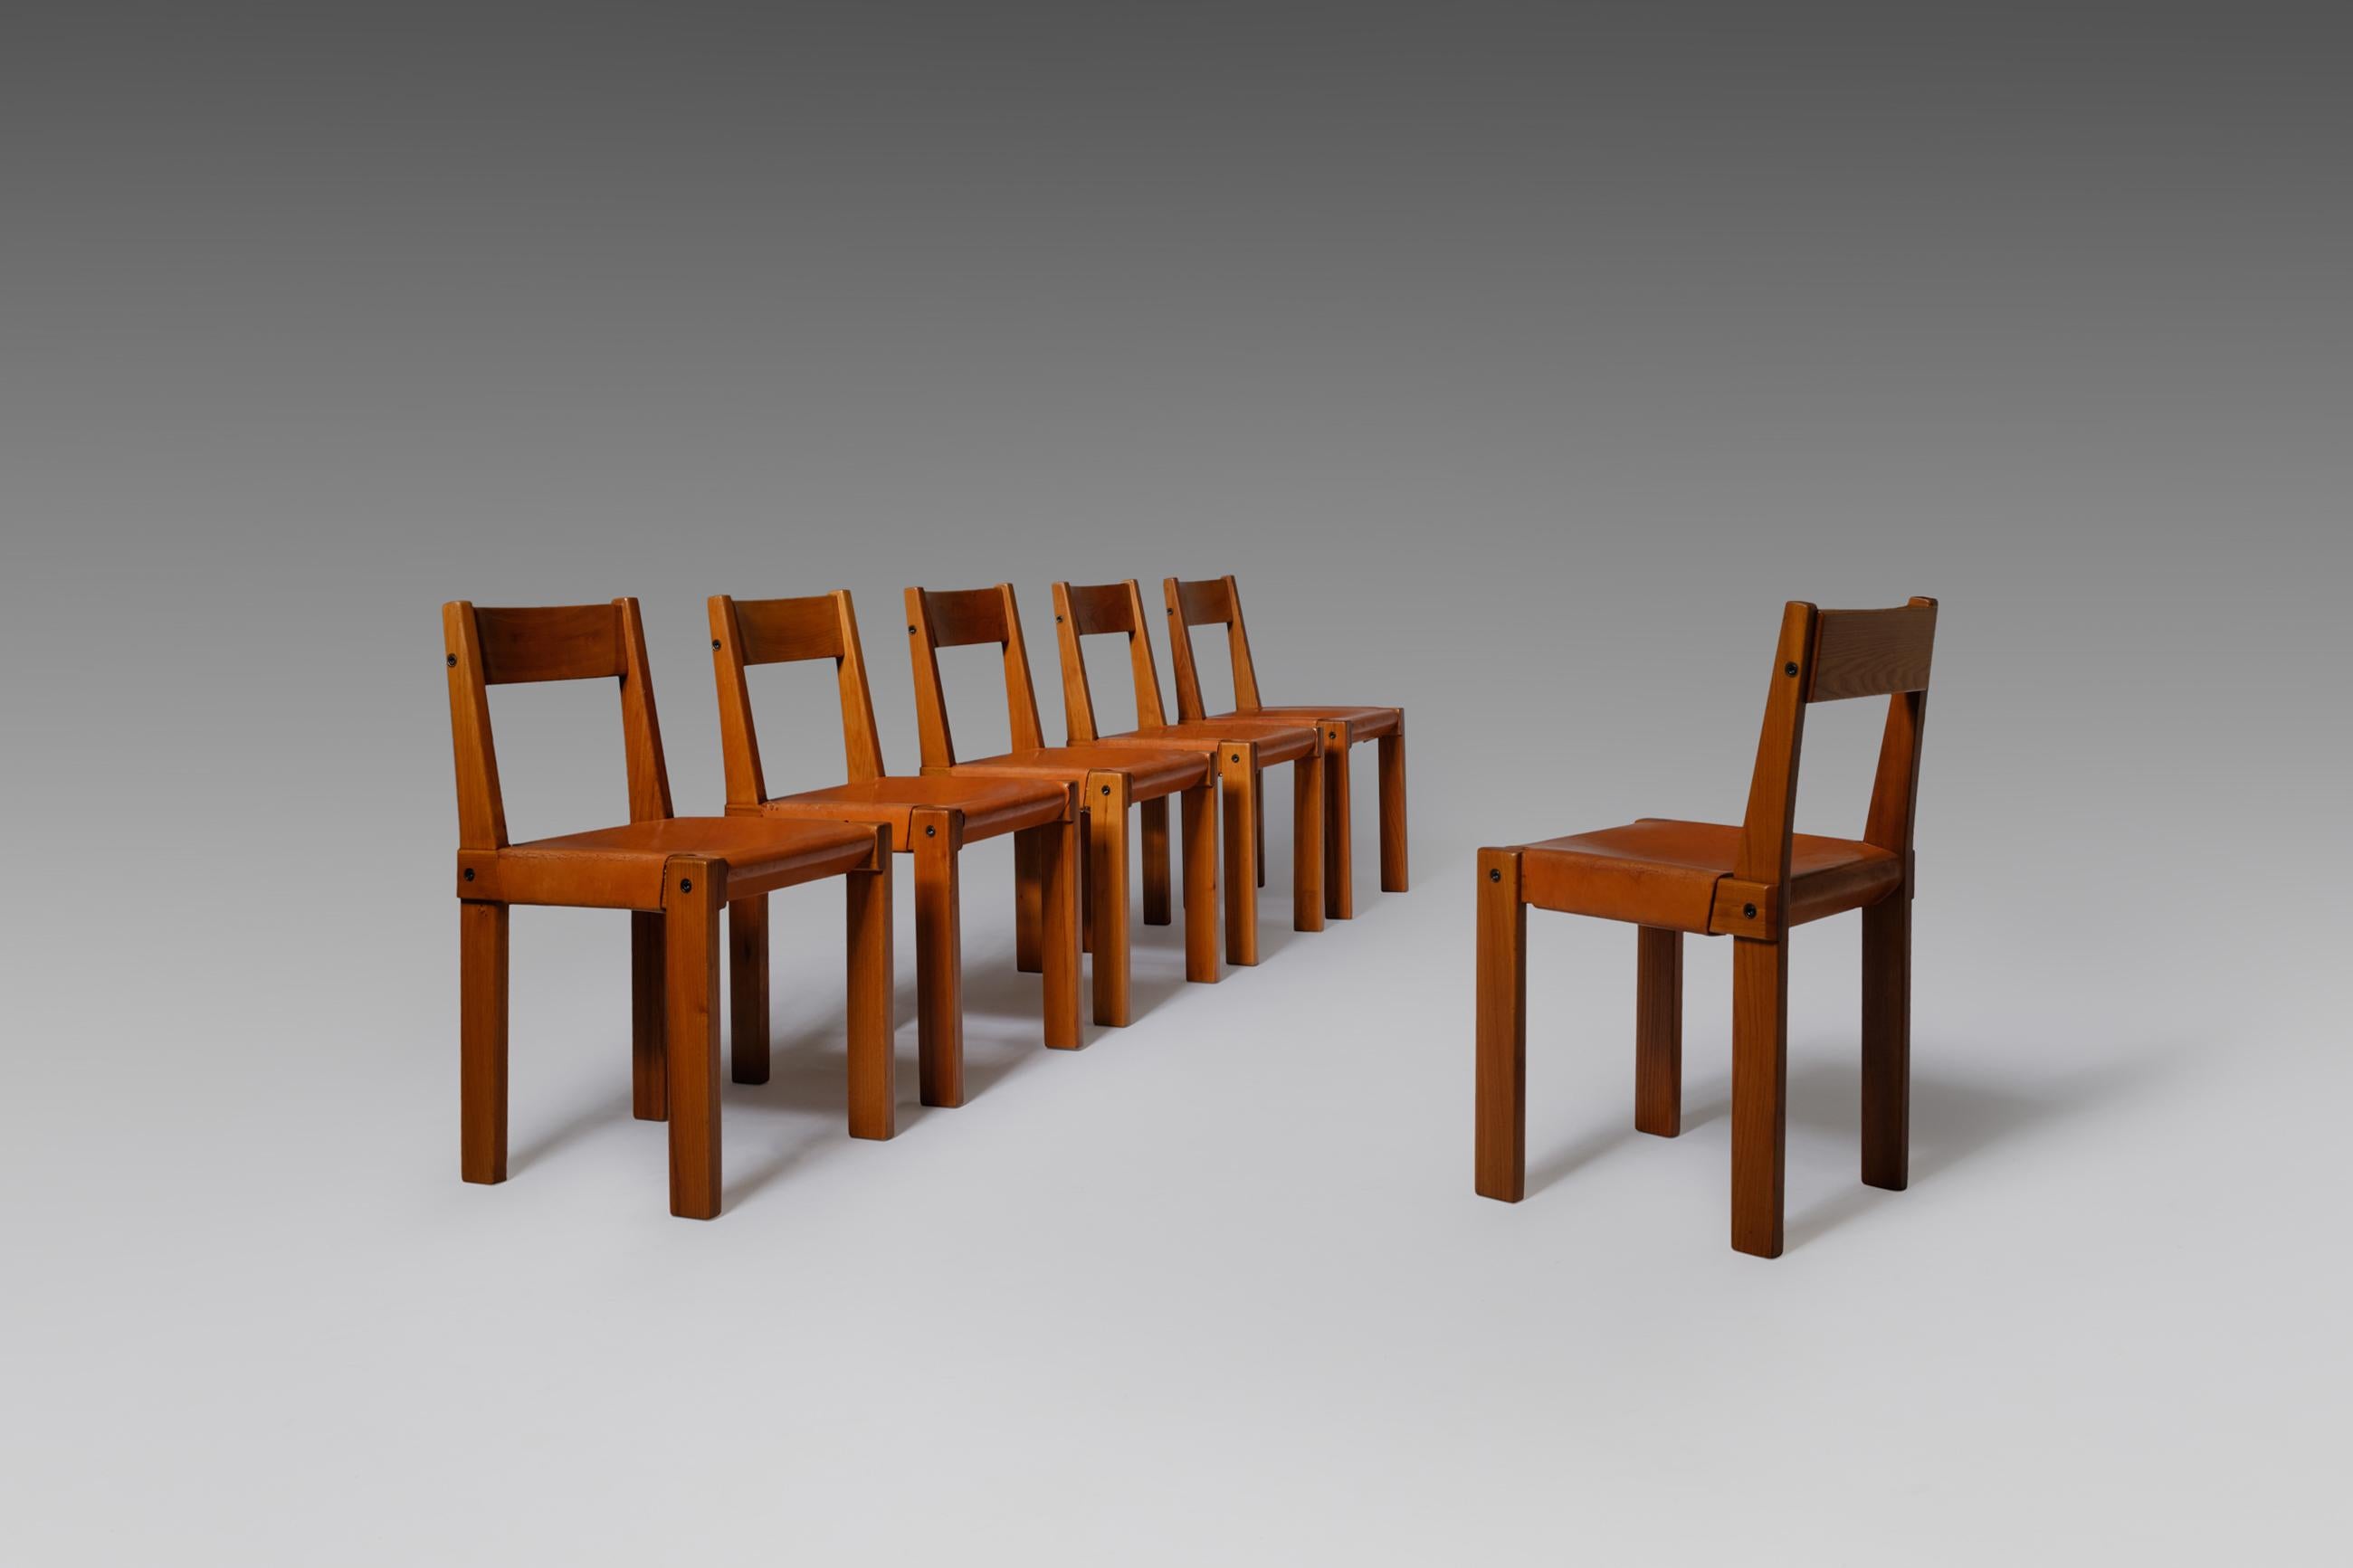 Set of six ‘S24’ dining chairs by Pierre Chapo, France, 1966. Made of solid elmwood with beautifully patinated cognac saddle leather seating. The well-crafted solid French elm wooden frame and backrest immediately catches the eye. Very interesting